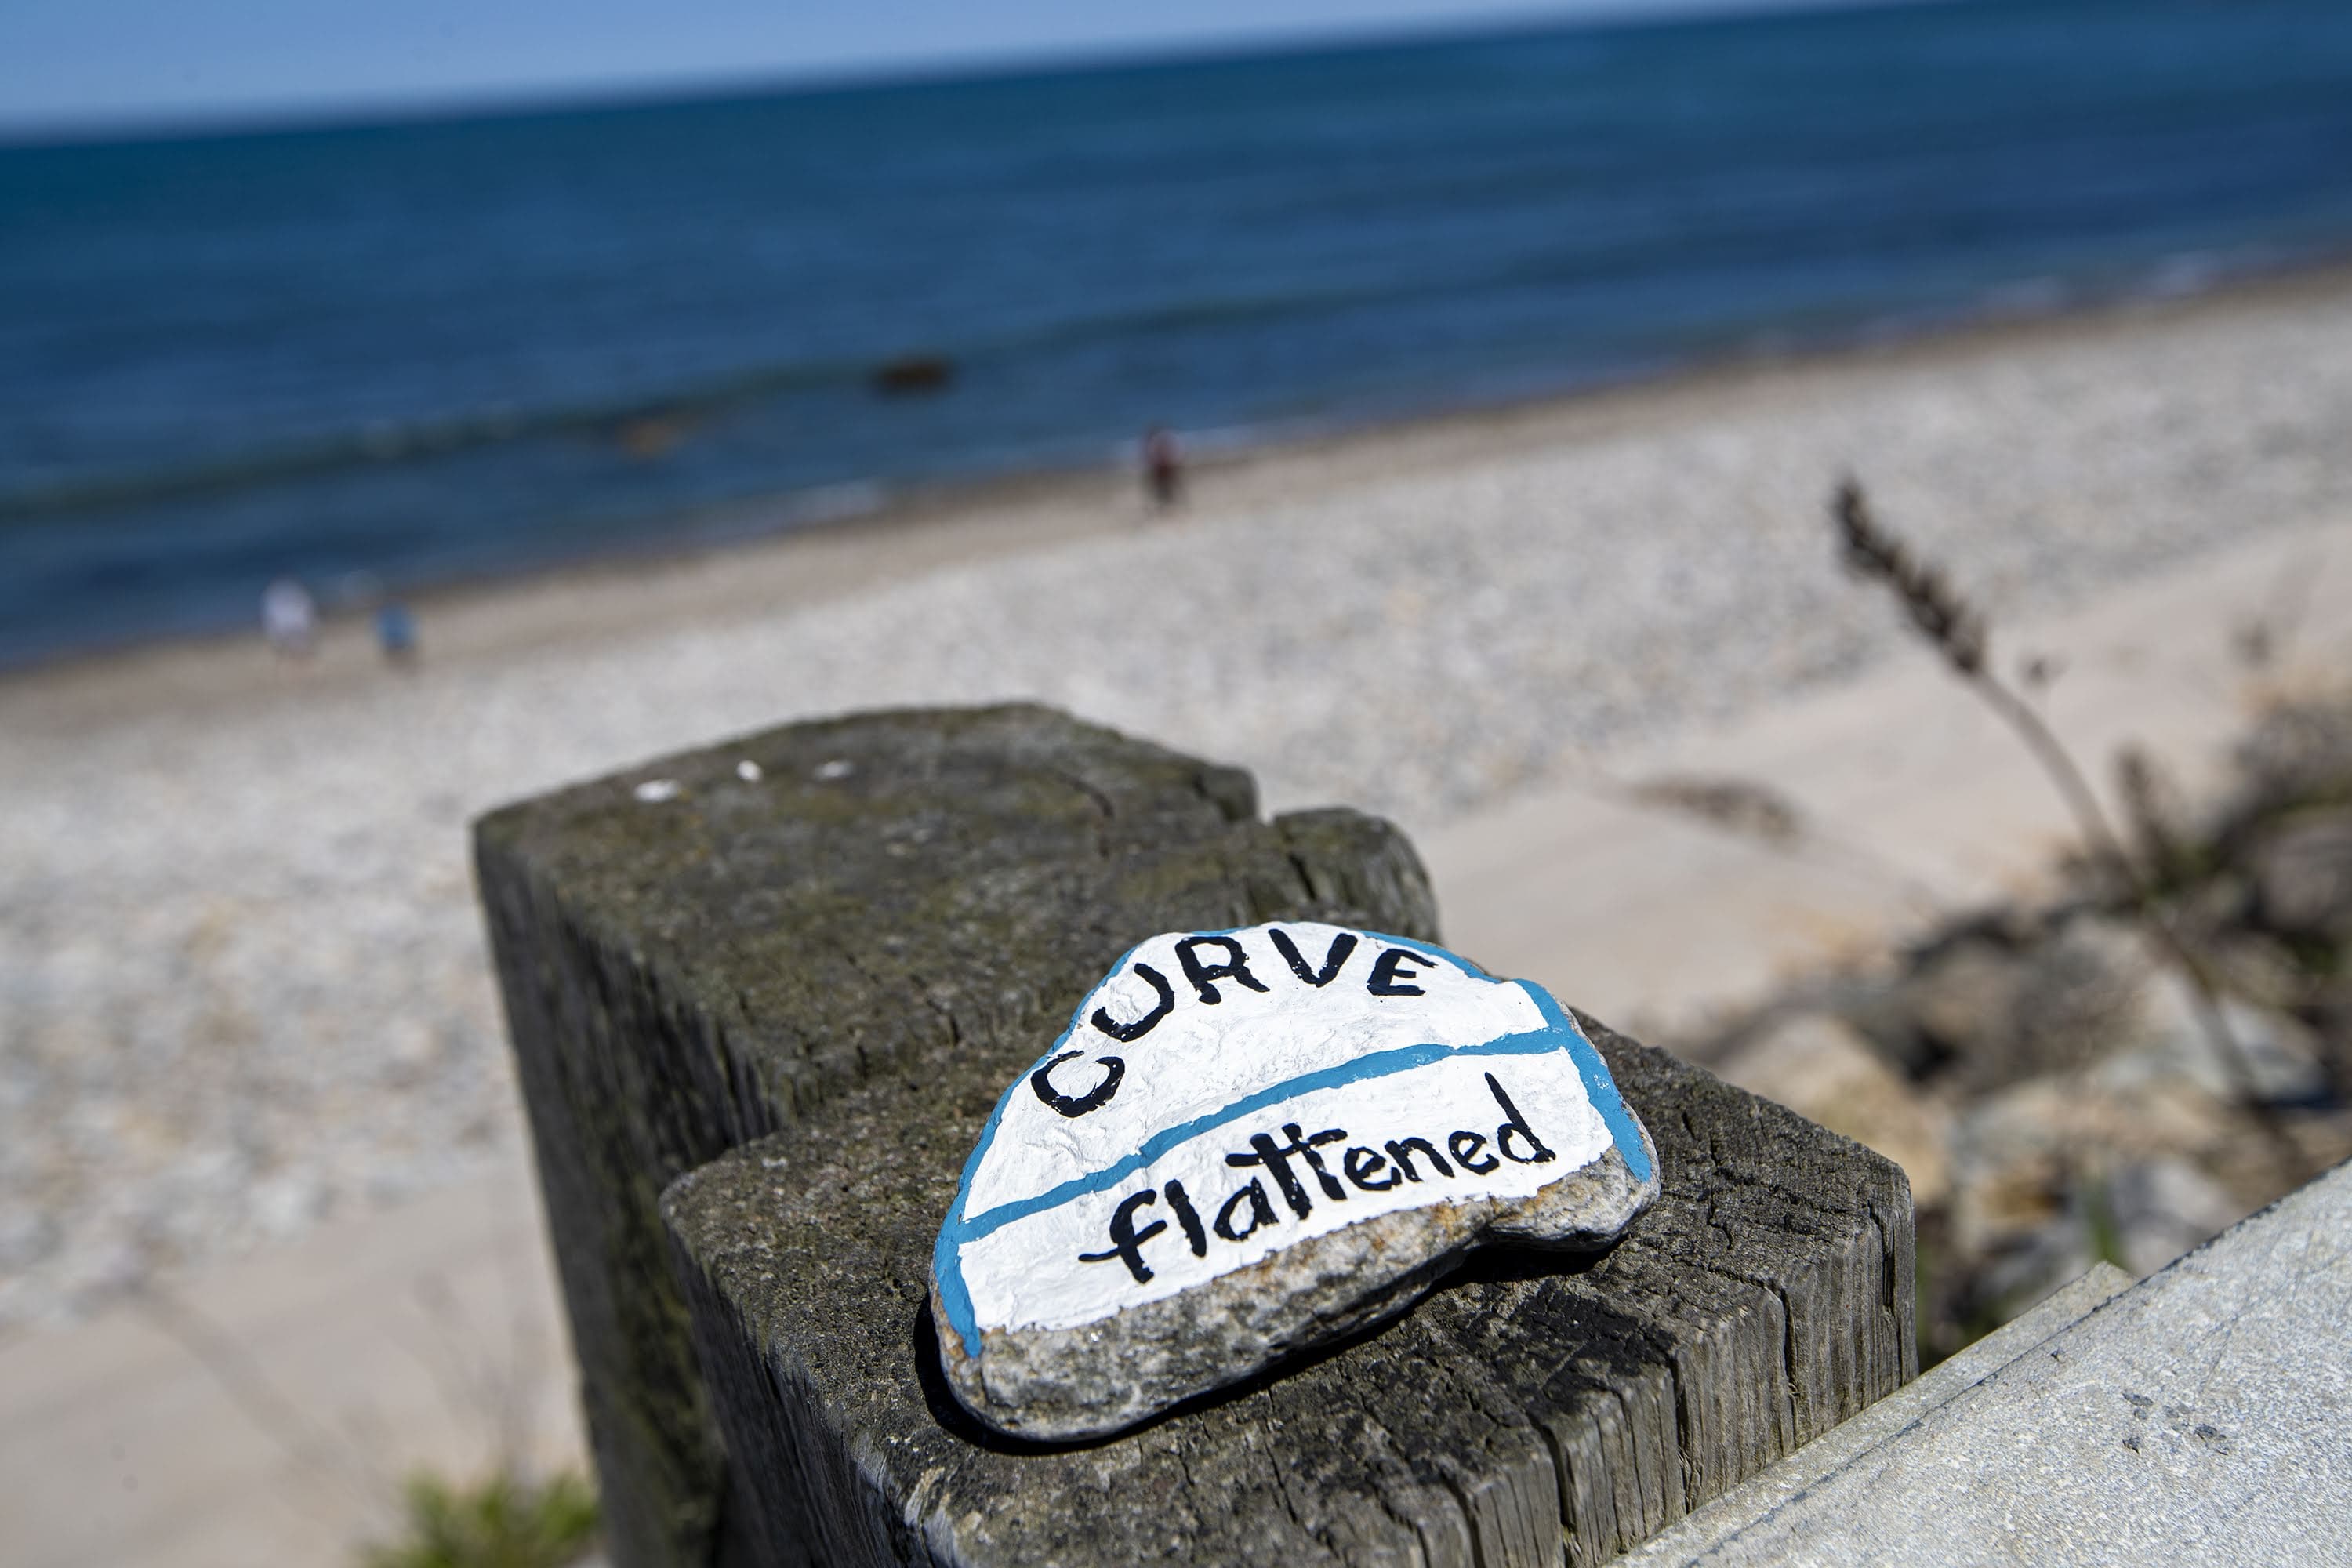 Brightly painted rocks with messages inscribed on them in response to the pandemic are left on top of the guardrails at a virtually empty Brant Rock Beach in Marshfield. (Jesse Costa/WBUR)